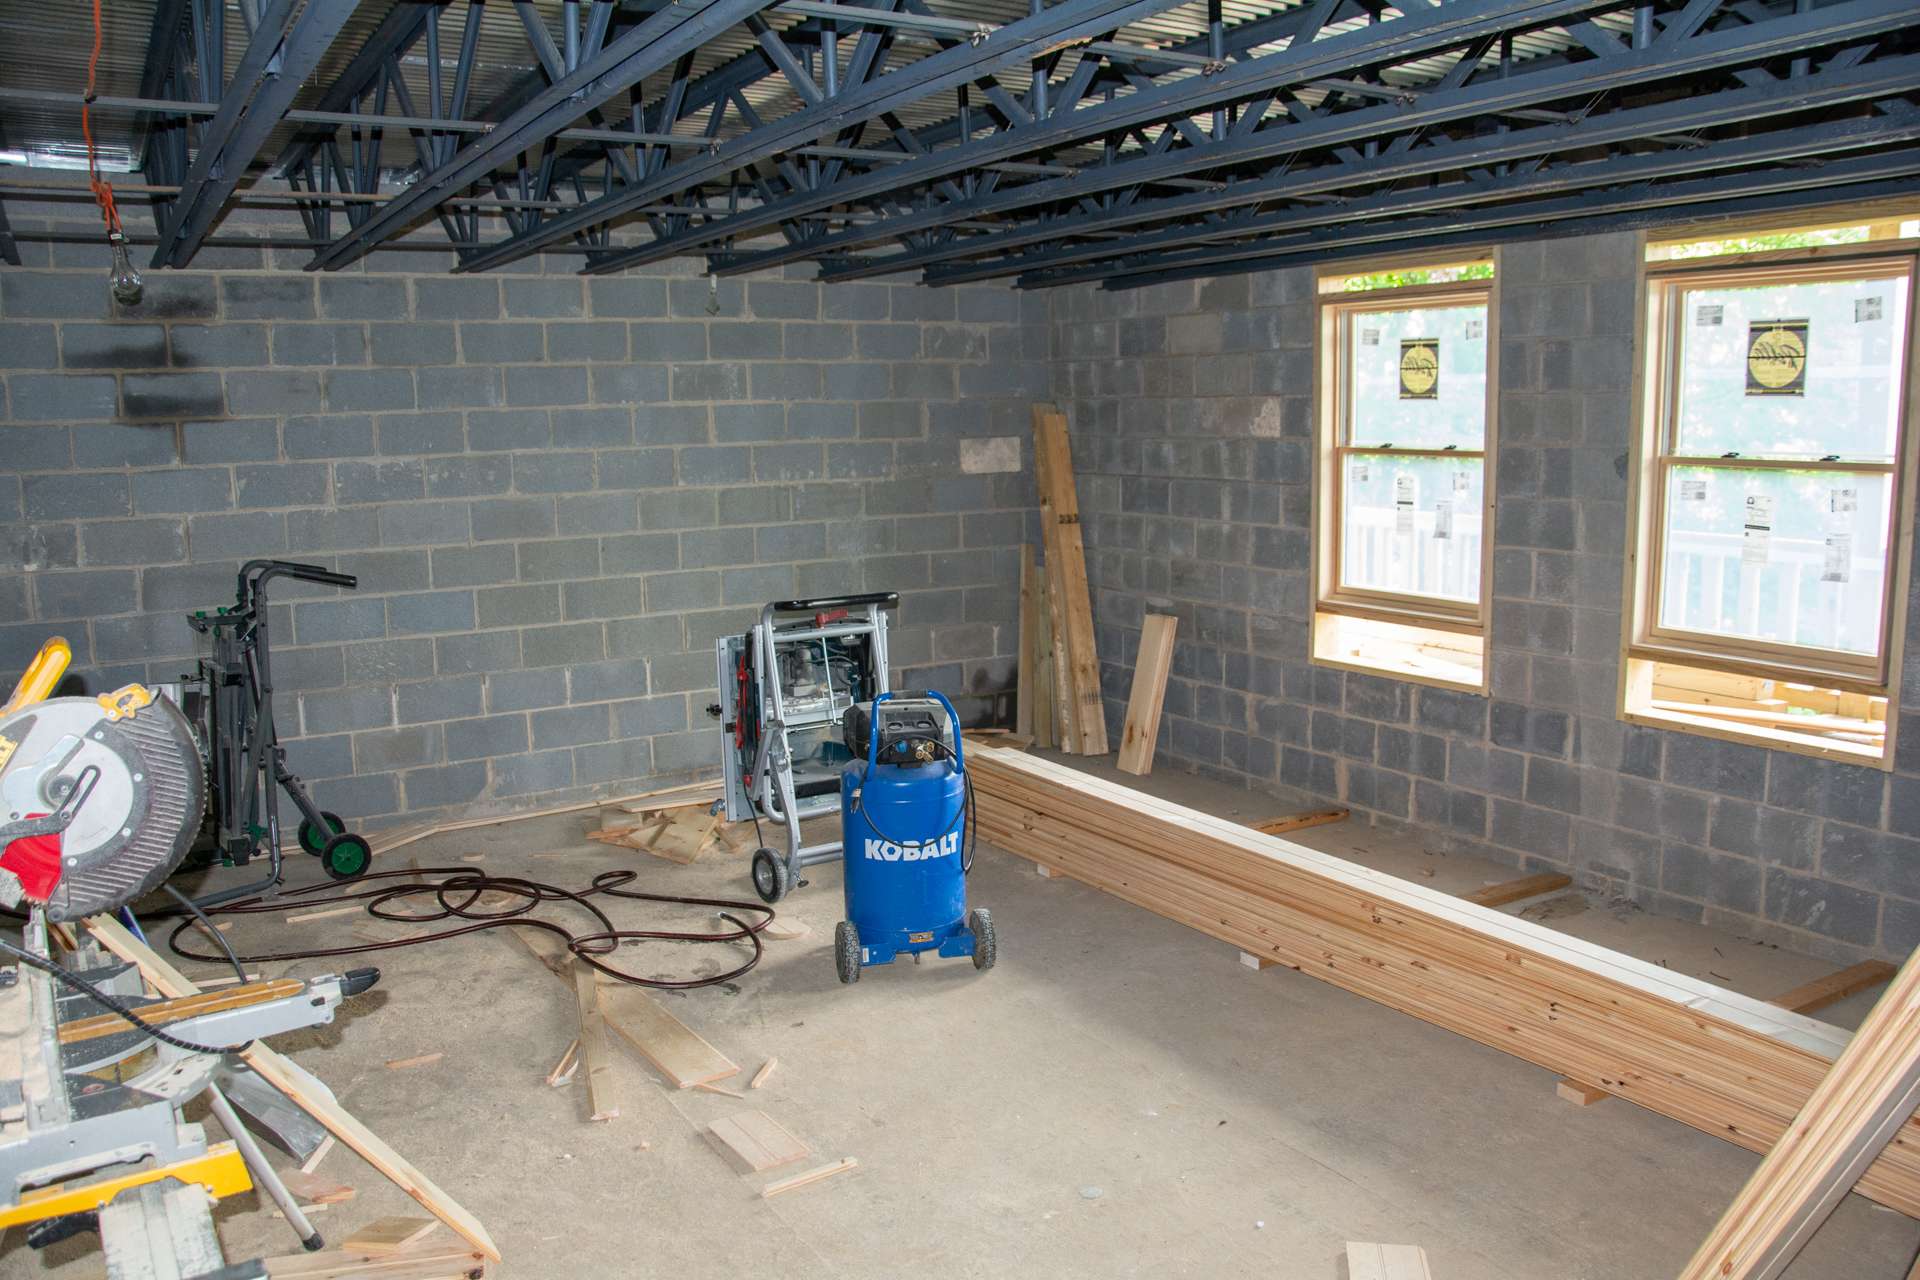 To complete the main level, a large workshop area is ideal for home projects.